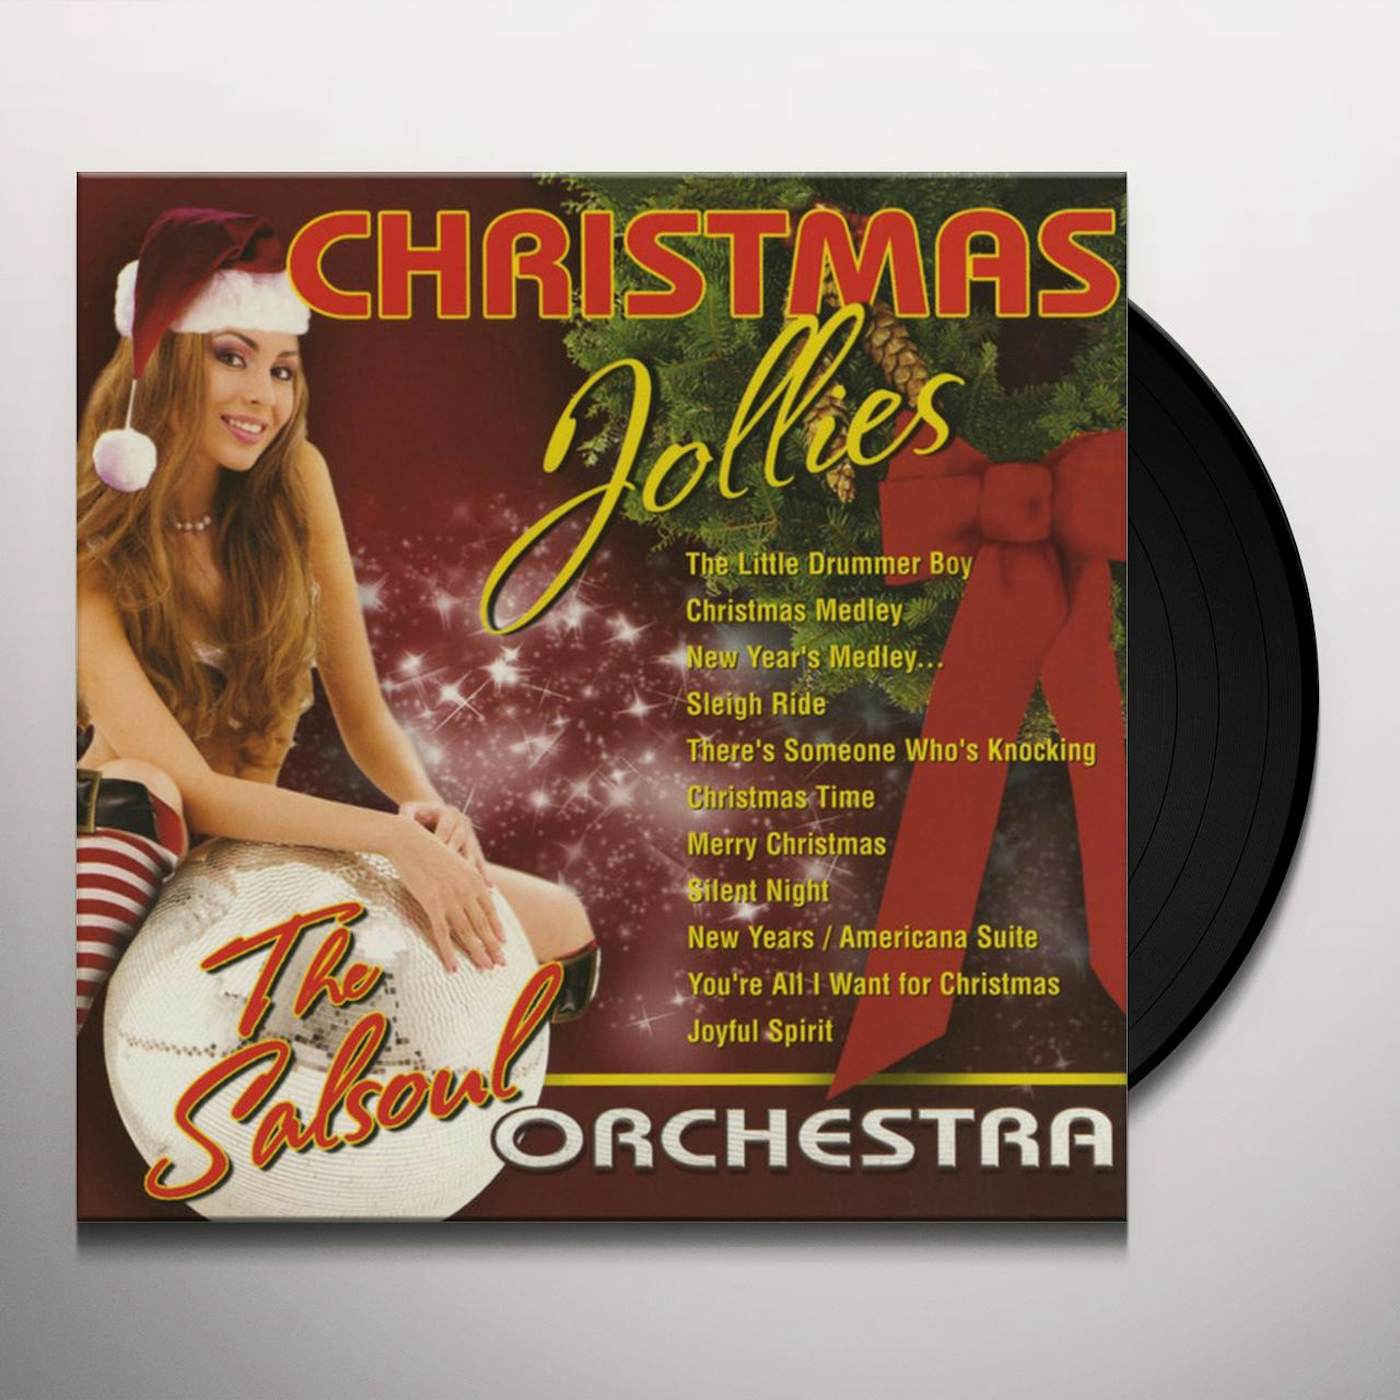 The Salsoul Orchestra Christmas Jollies Vinyl Record